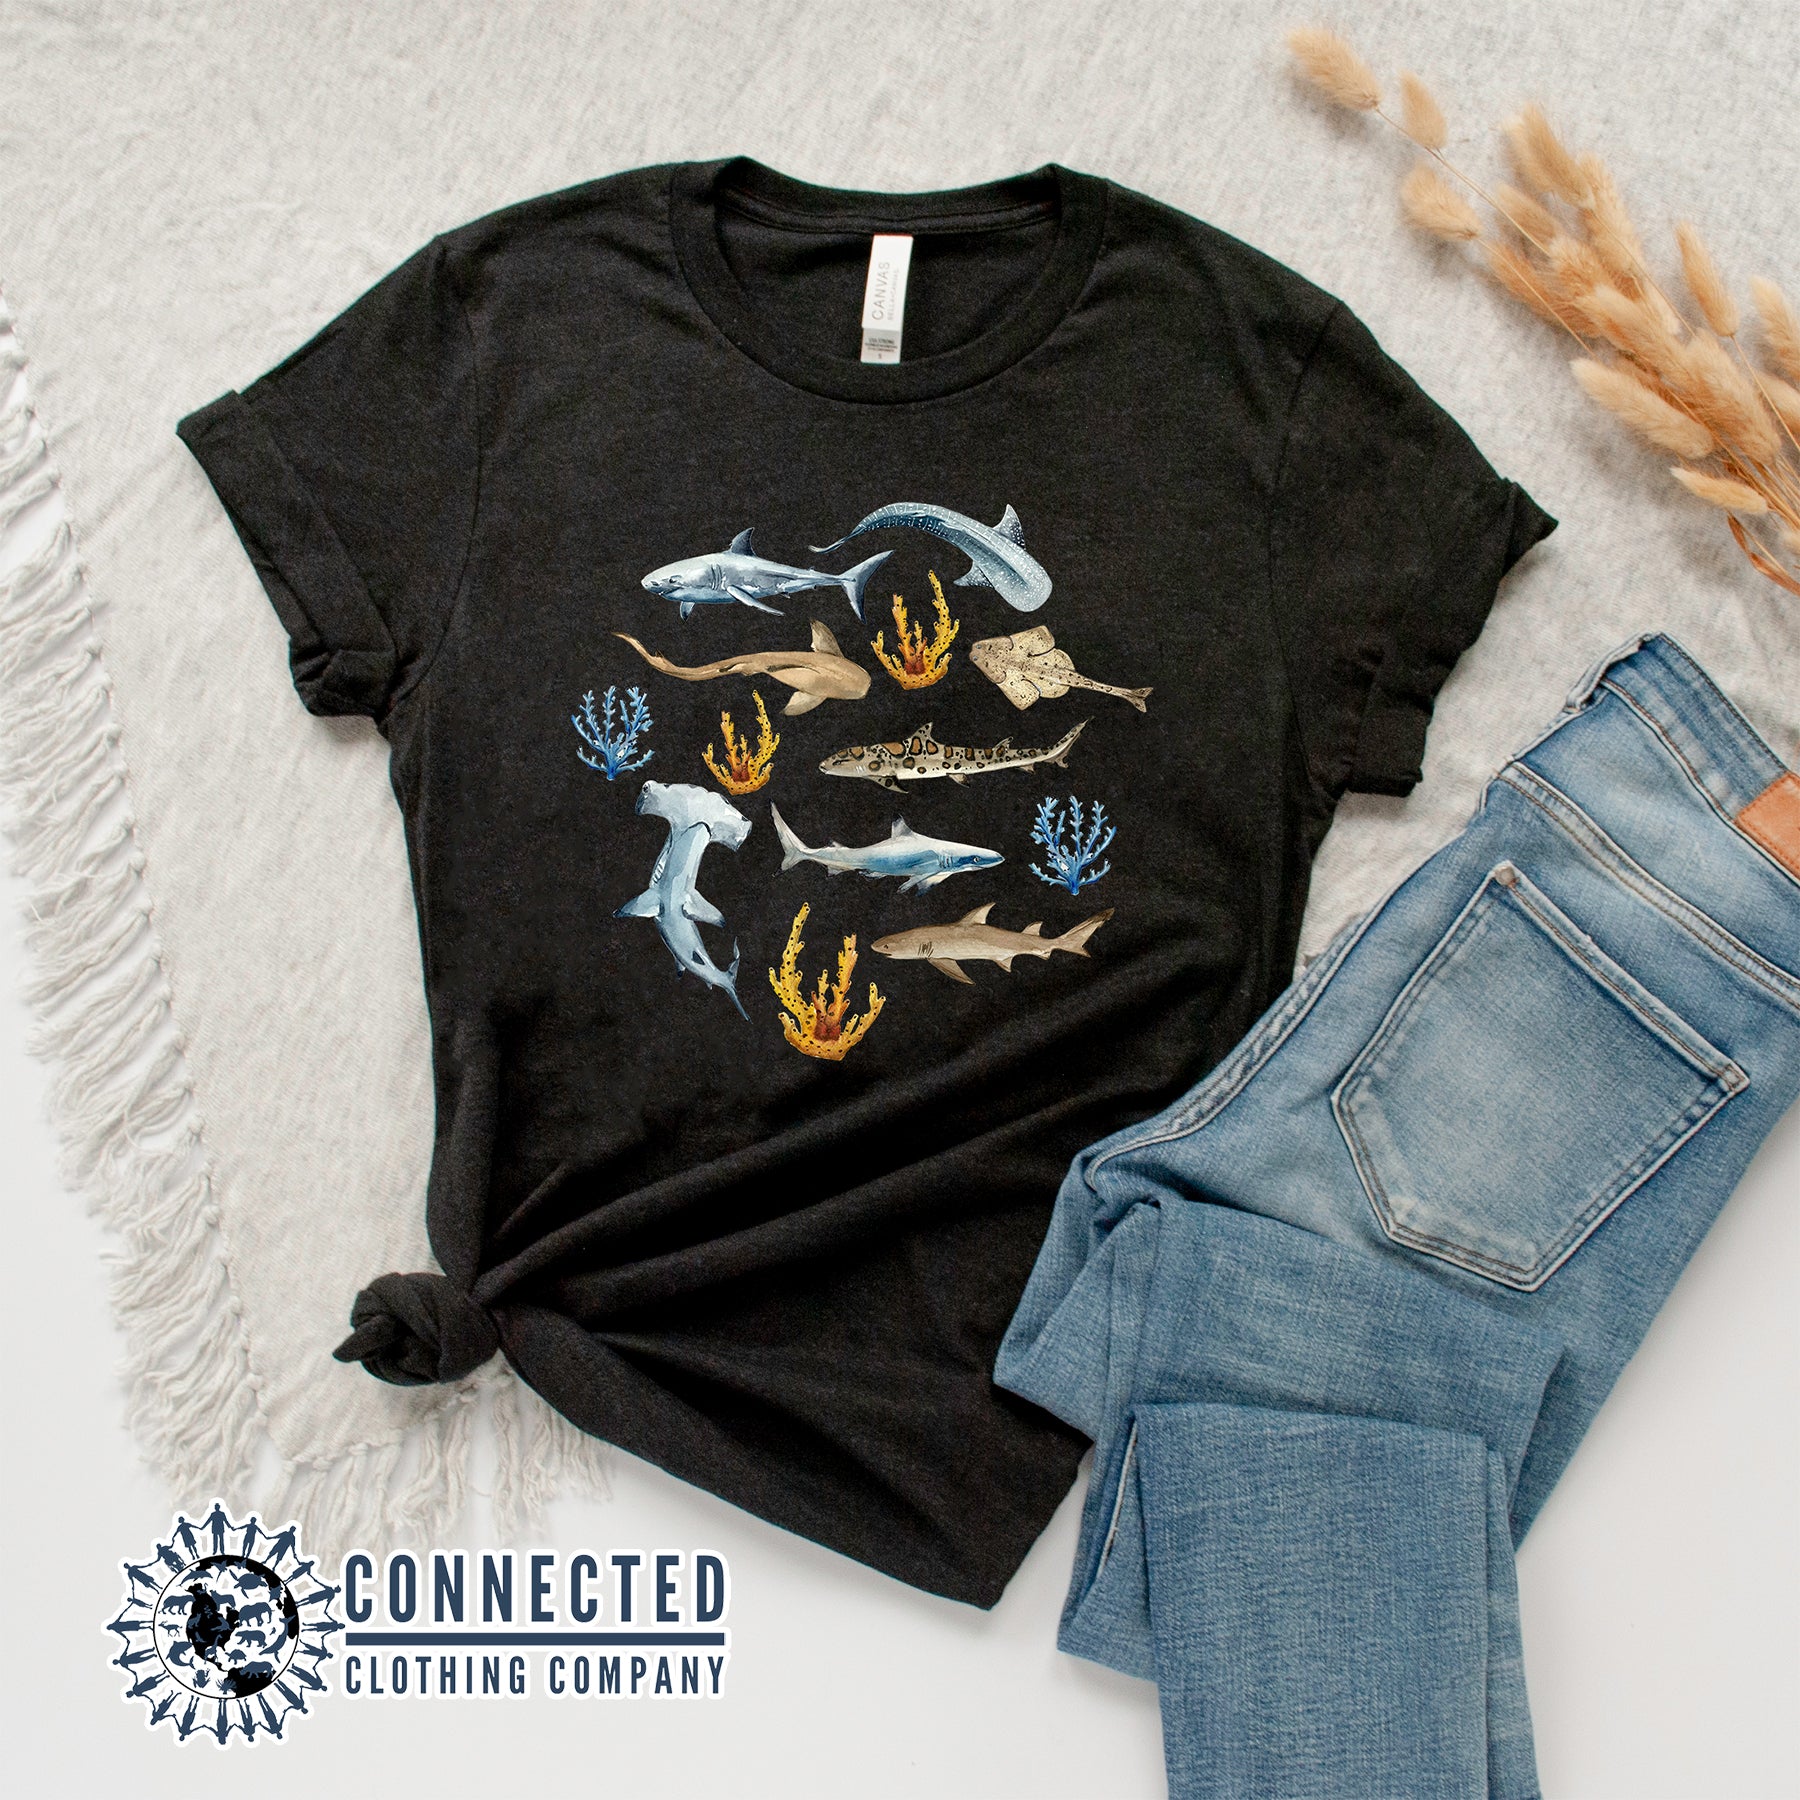 Flatlay of Black Shark Ocean Watercolor Unisex Short-Sleeve Tshirt - Connected Clothing Company - Ethically and Sustainably Made - 10% of profits donated to shark conservation and ocean conservation